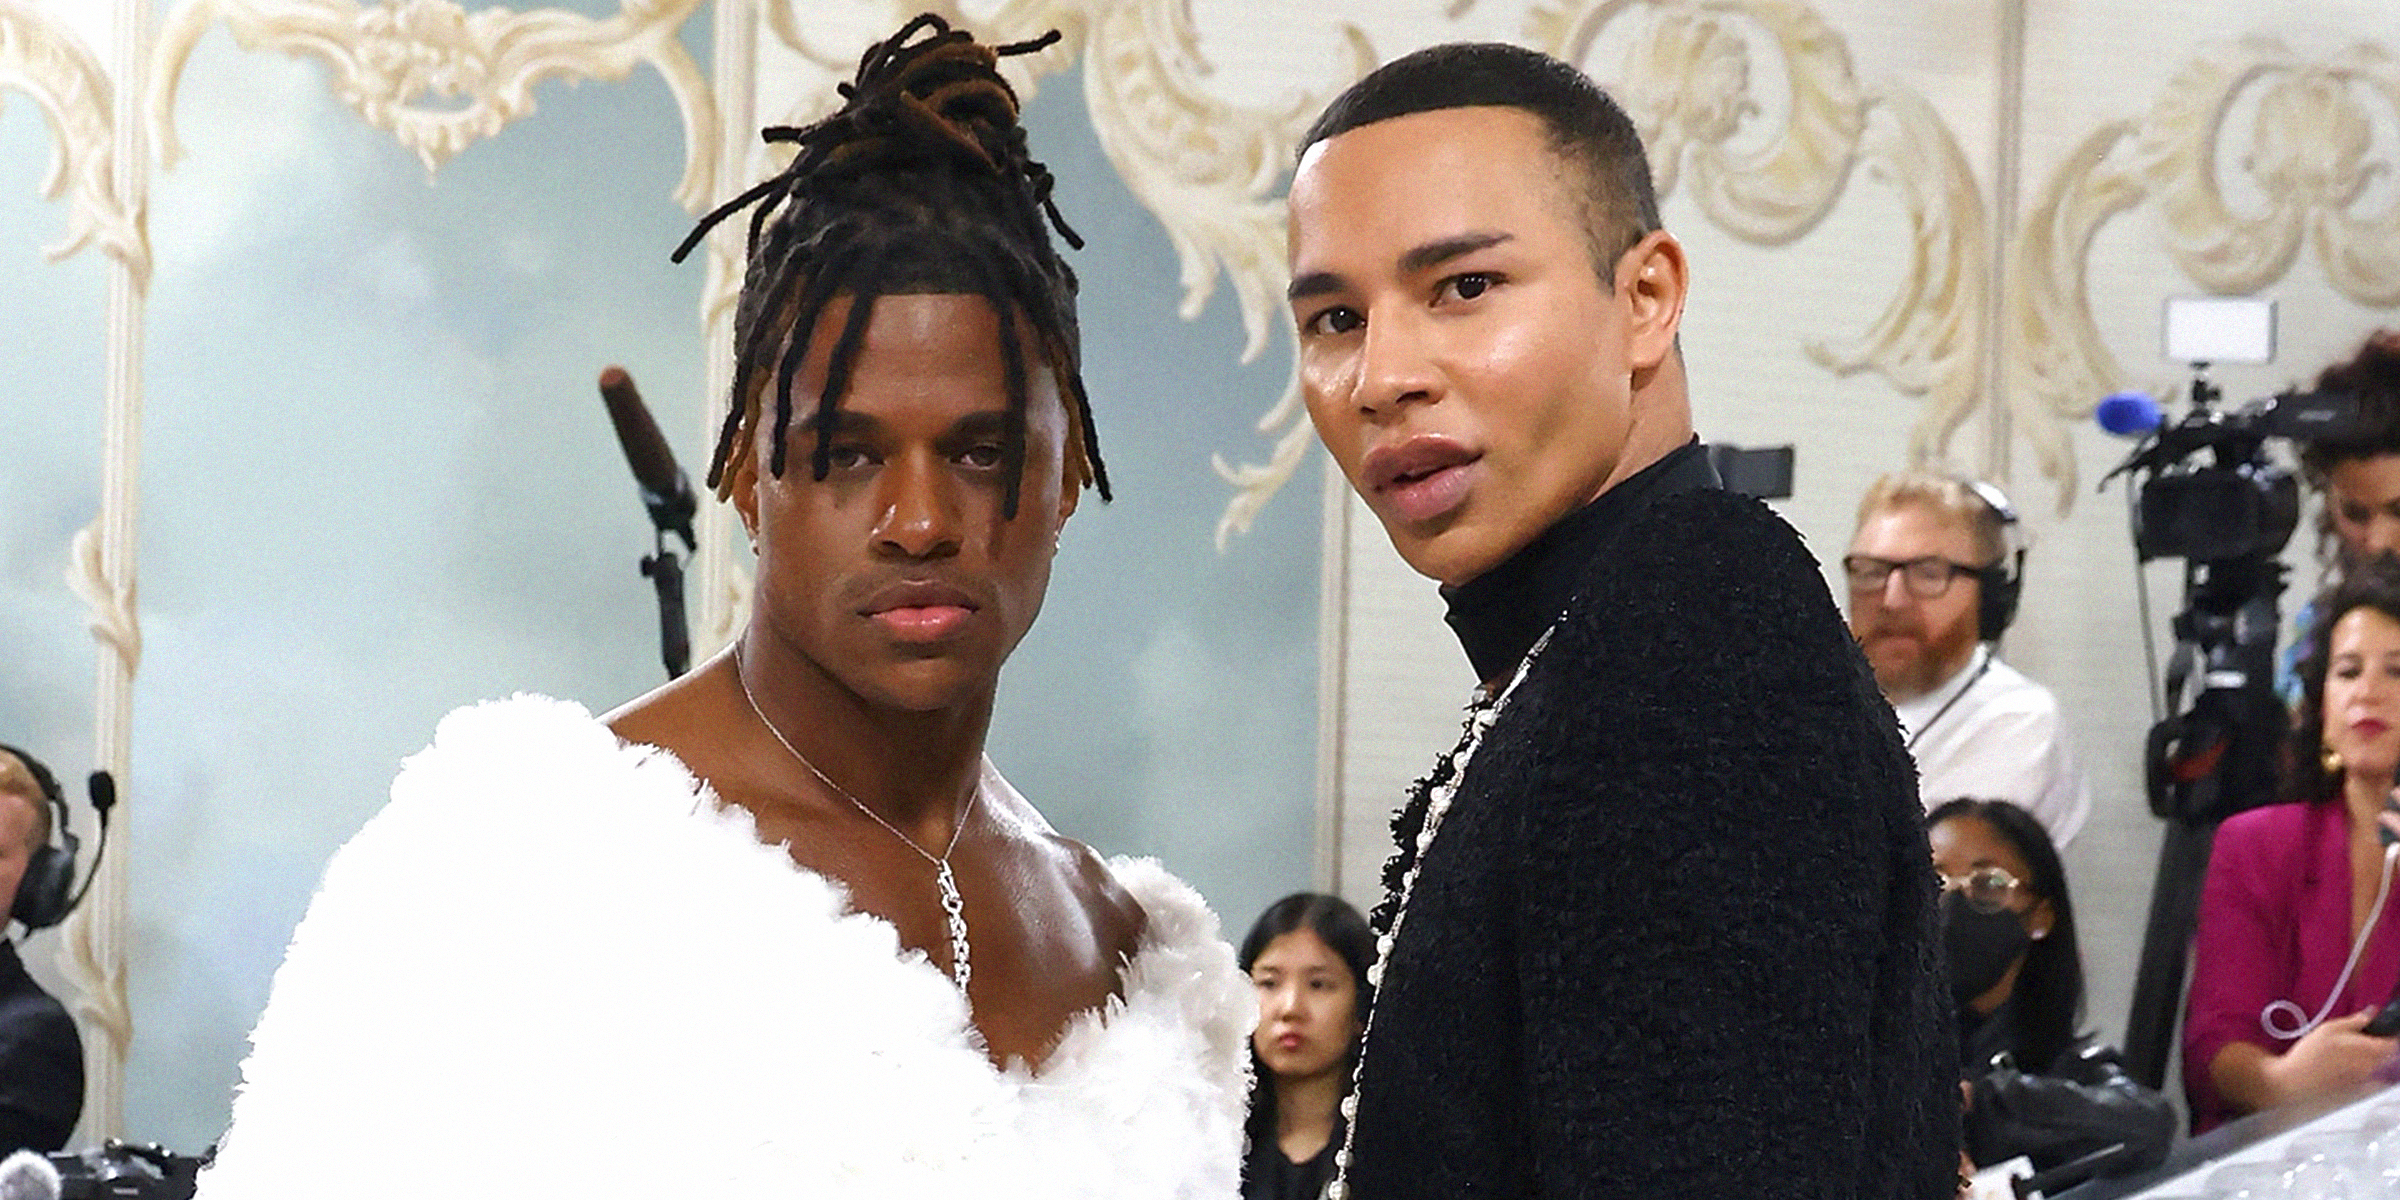 Jeremy Pope and Olivier Rousteing on May 1, 2023 in New York City. | Source: Getty Images